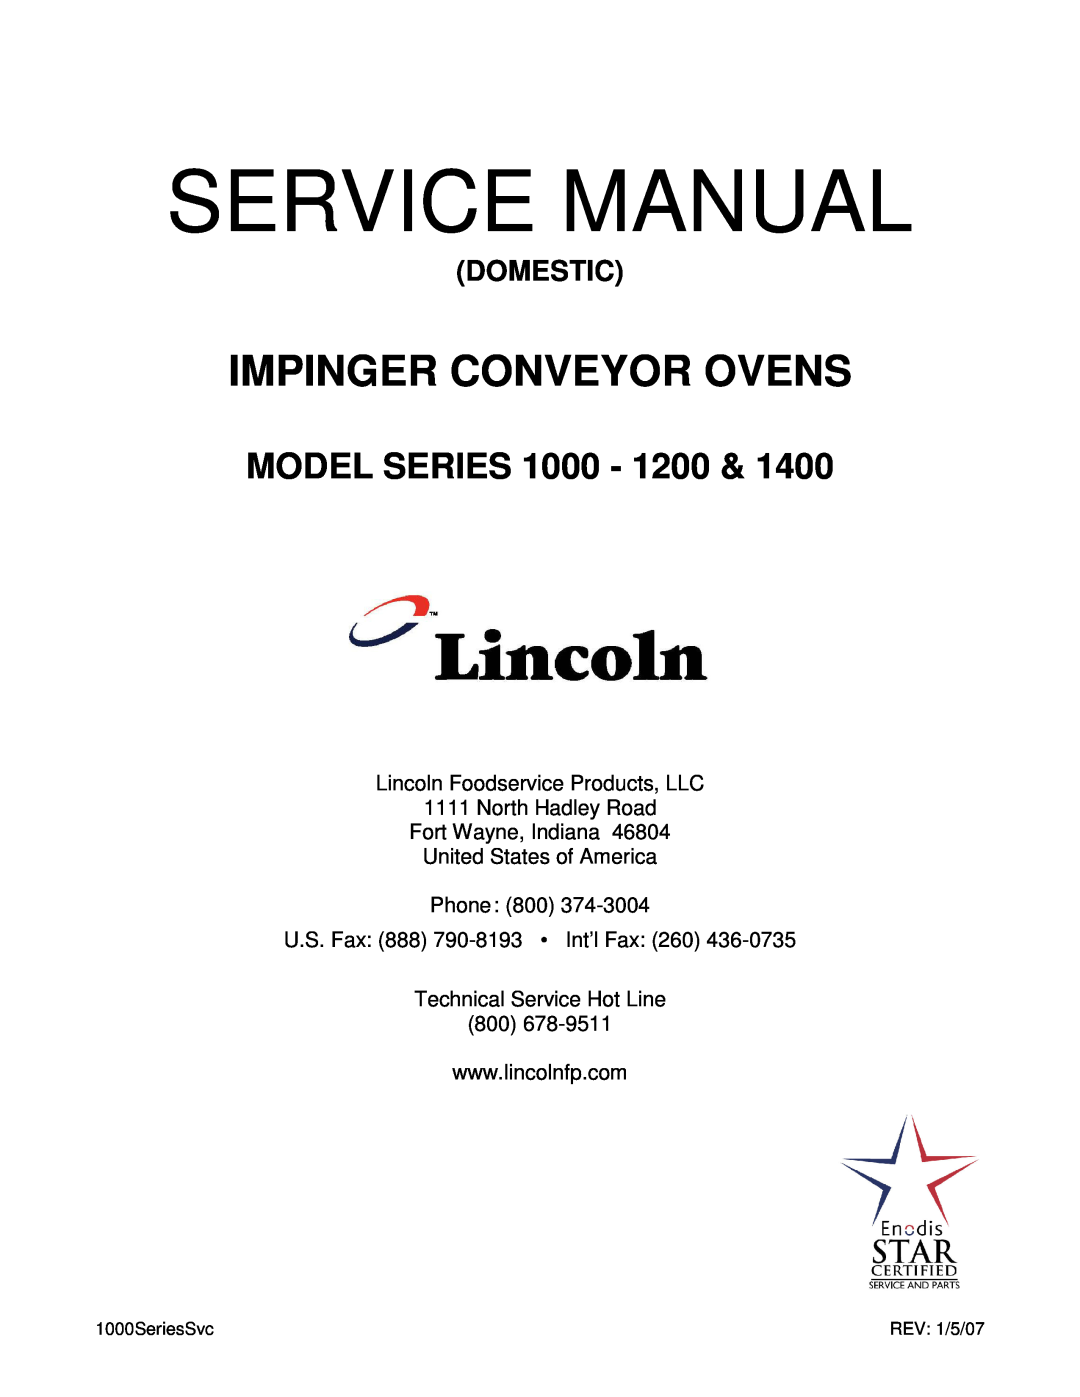 Lincoln 1200, 1400 service manual Lincoln Foodservice Products, LLC, North Hadley Road Fort Wayne, Indiana, Service Manual 